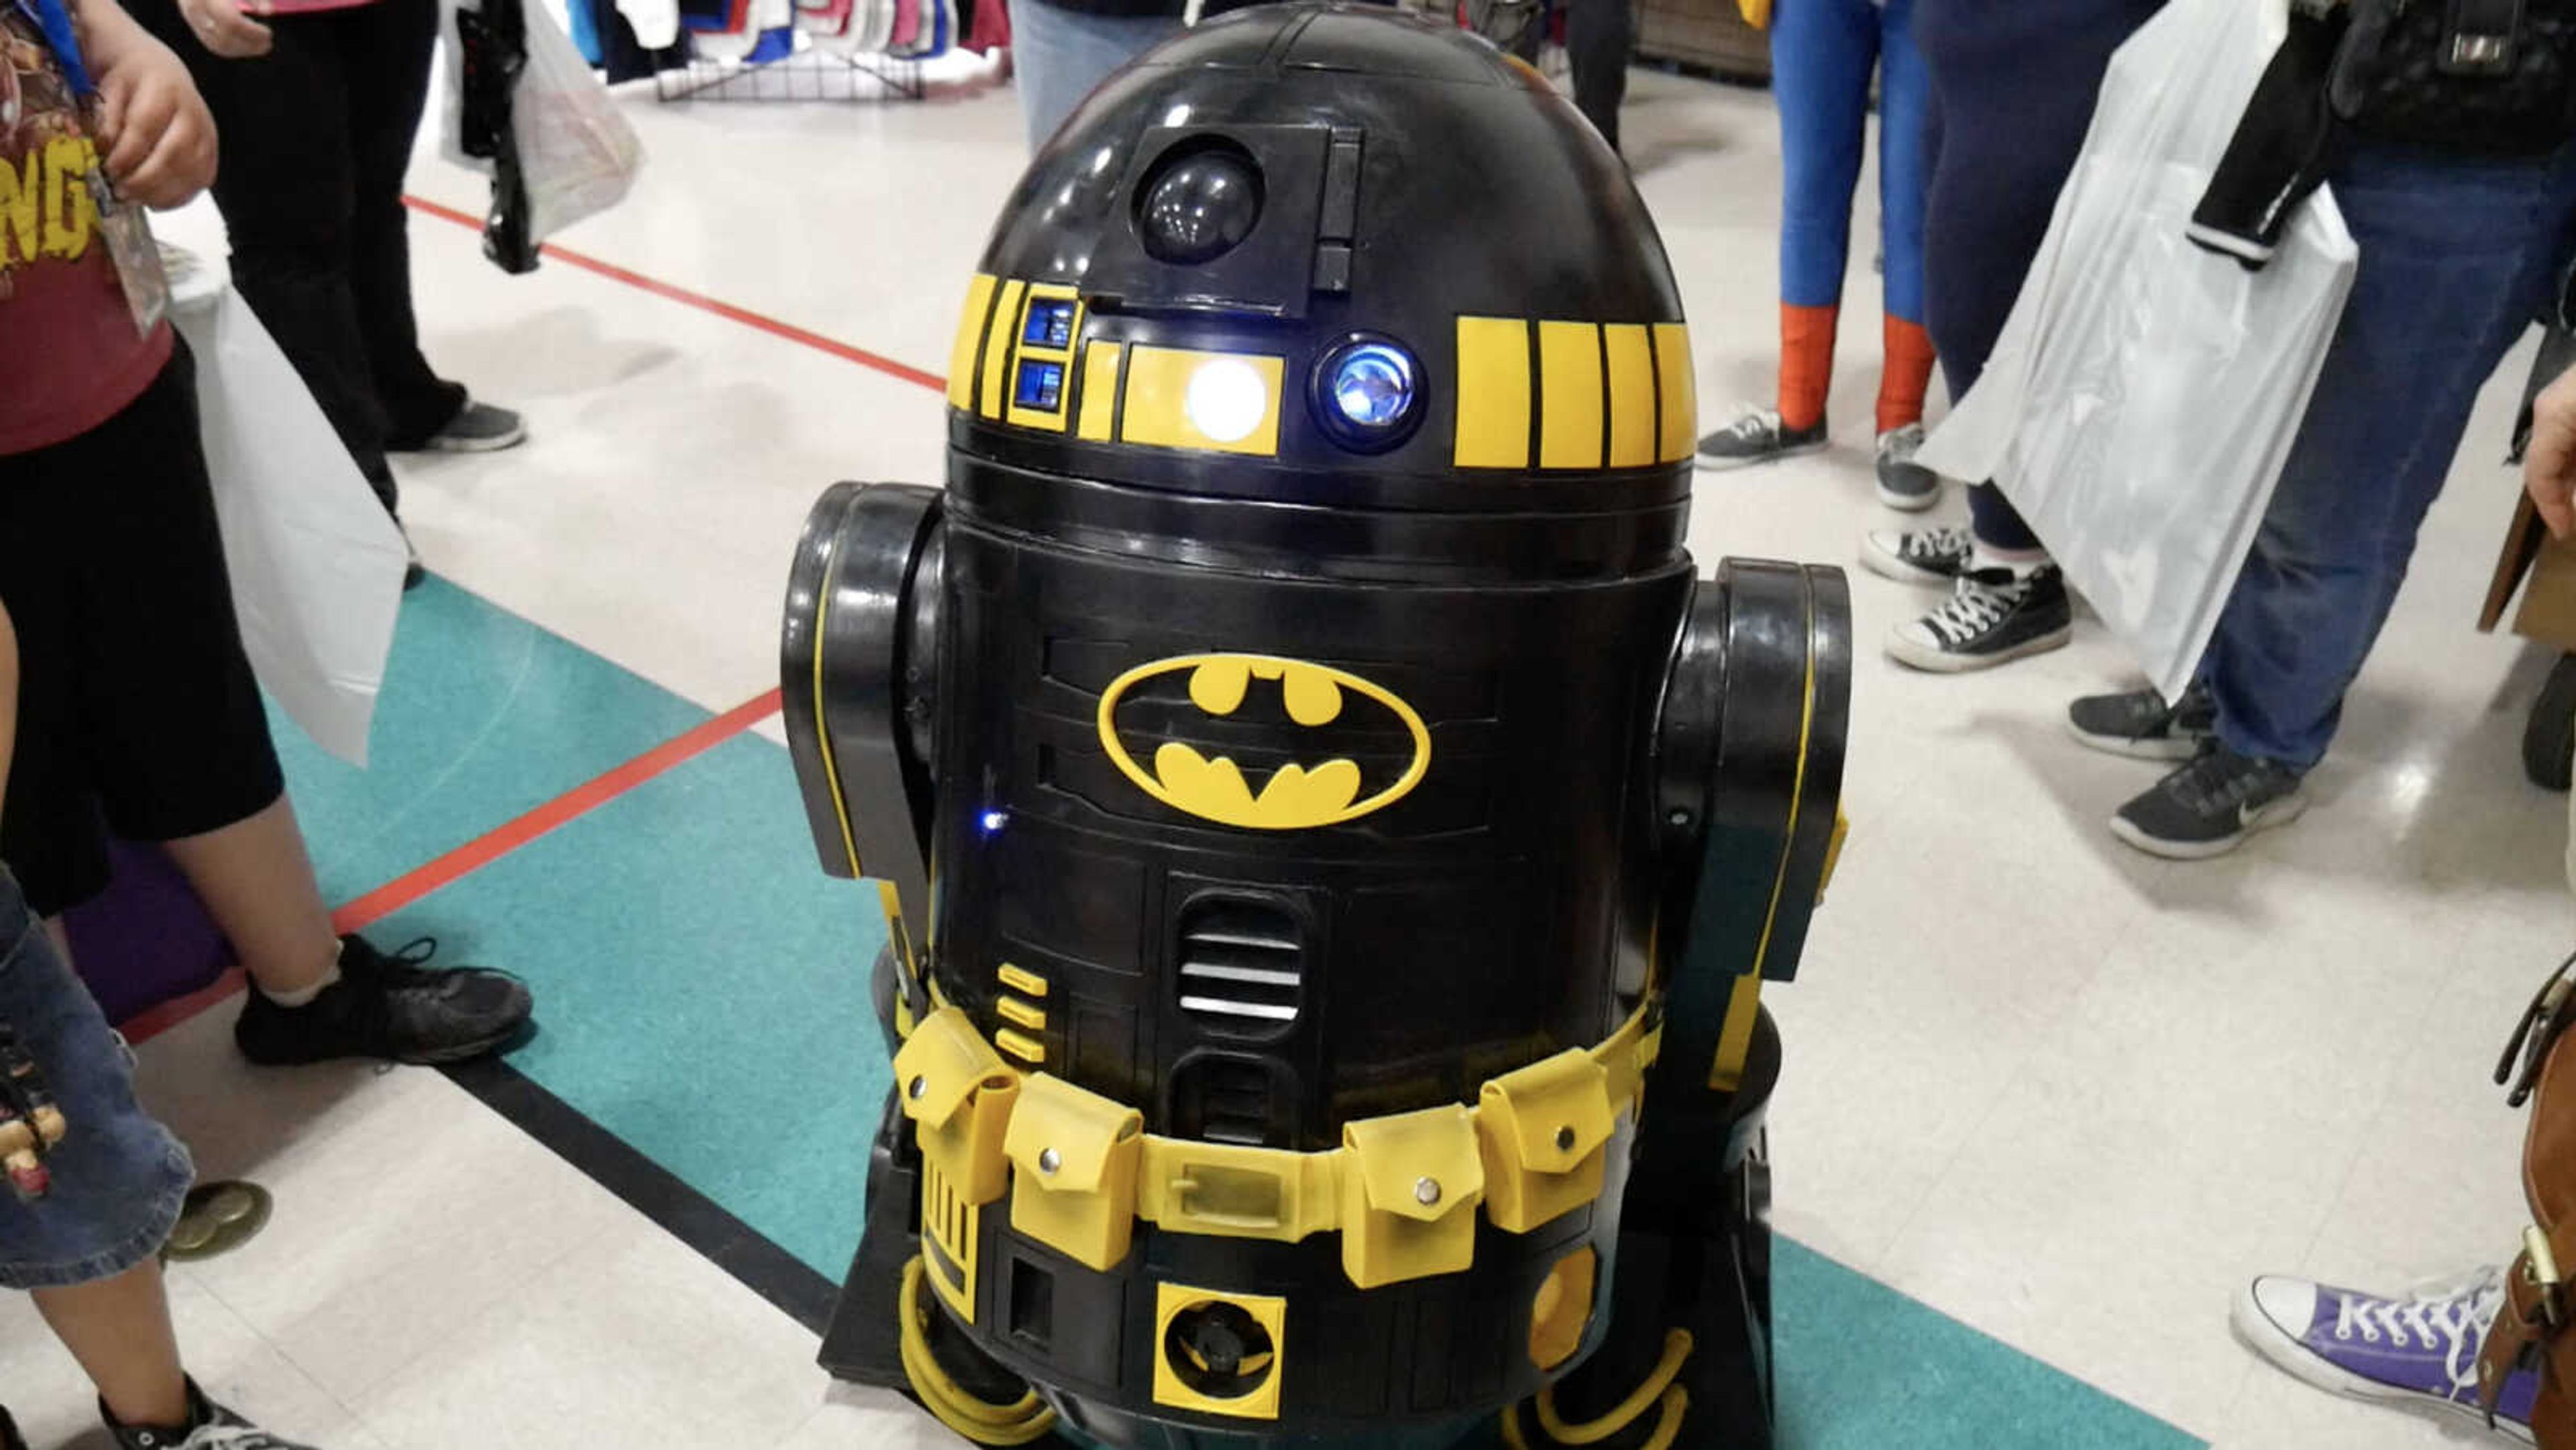 R2D2 dressed up as Batman at the annual Cape Comic Con at the Osage Centre April 20.